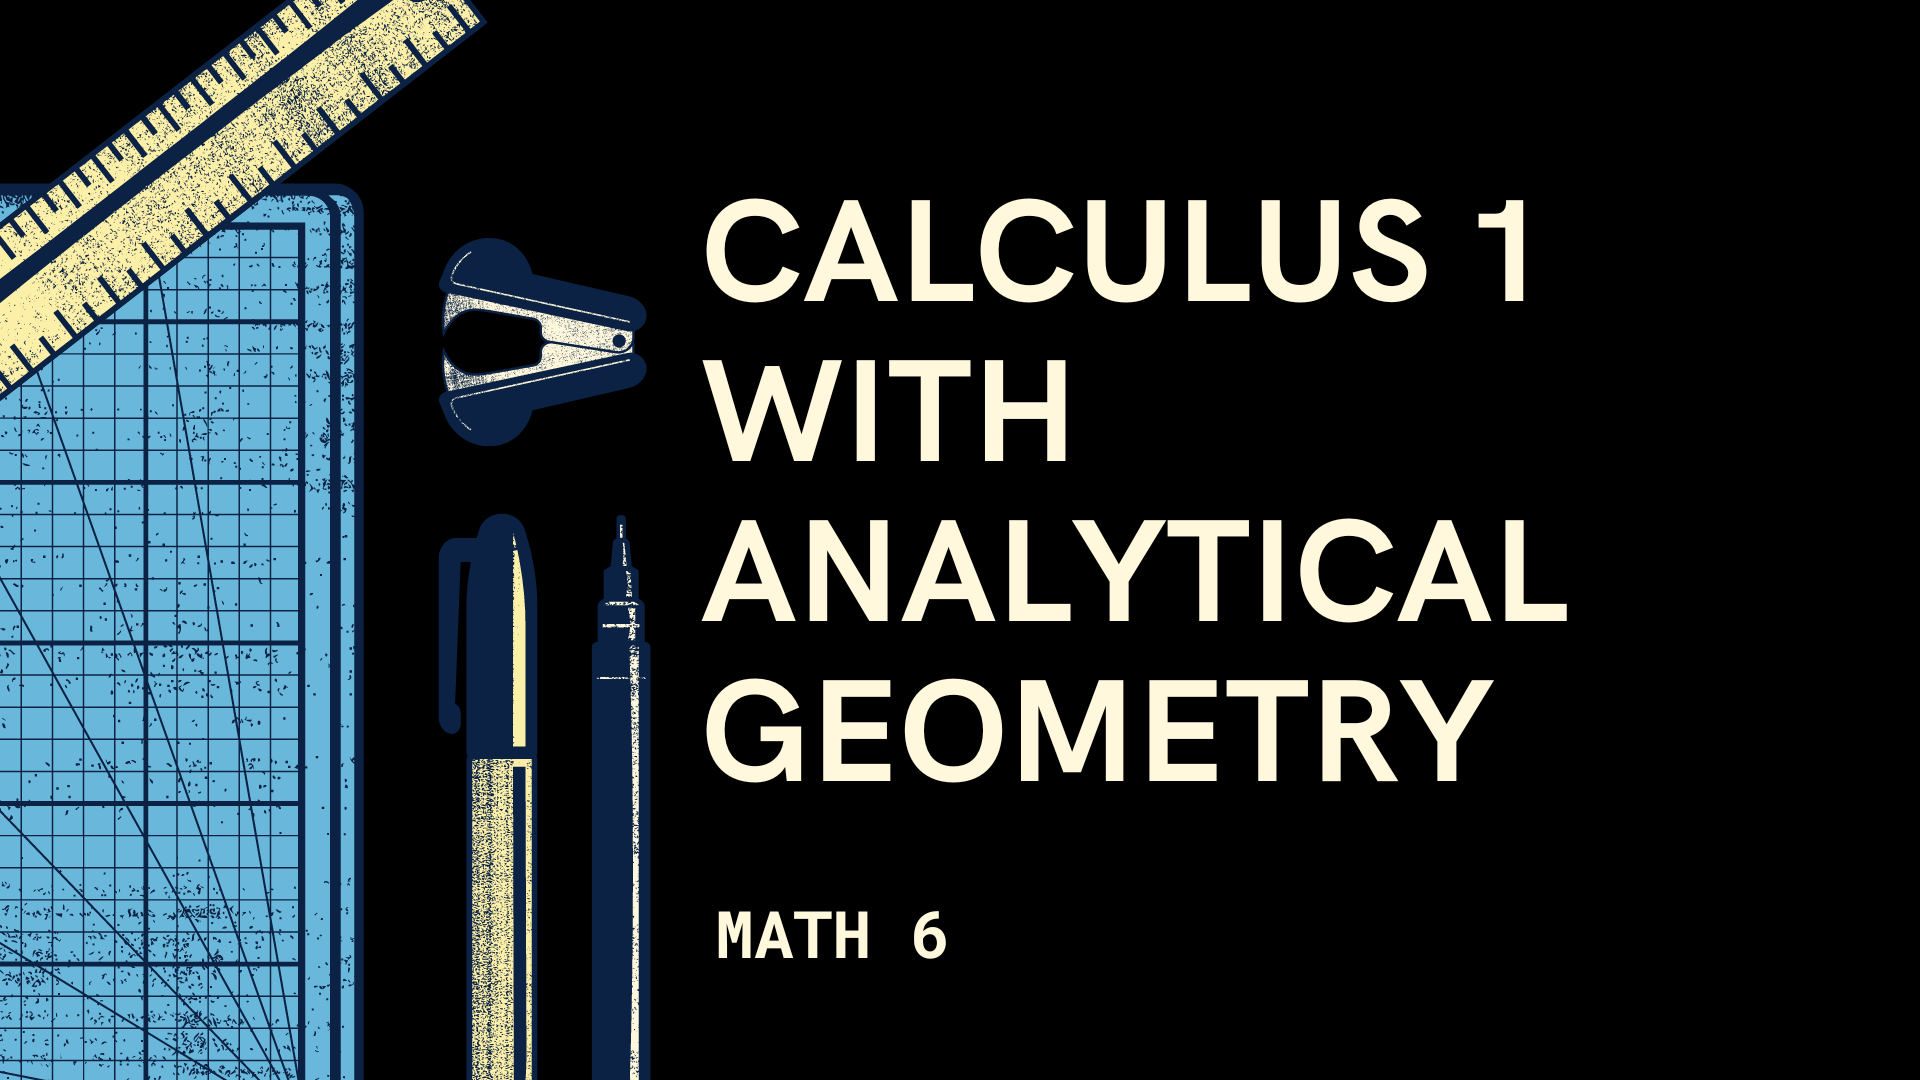 MATH 6 - Calculus 1 with Analytical Geometry 